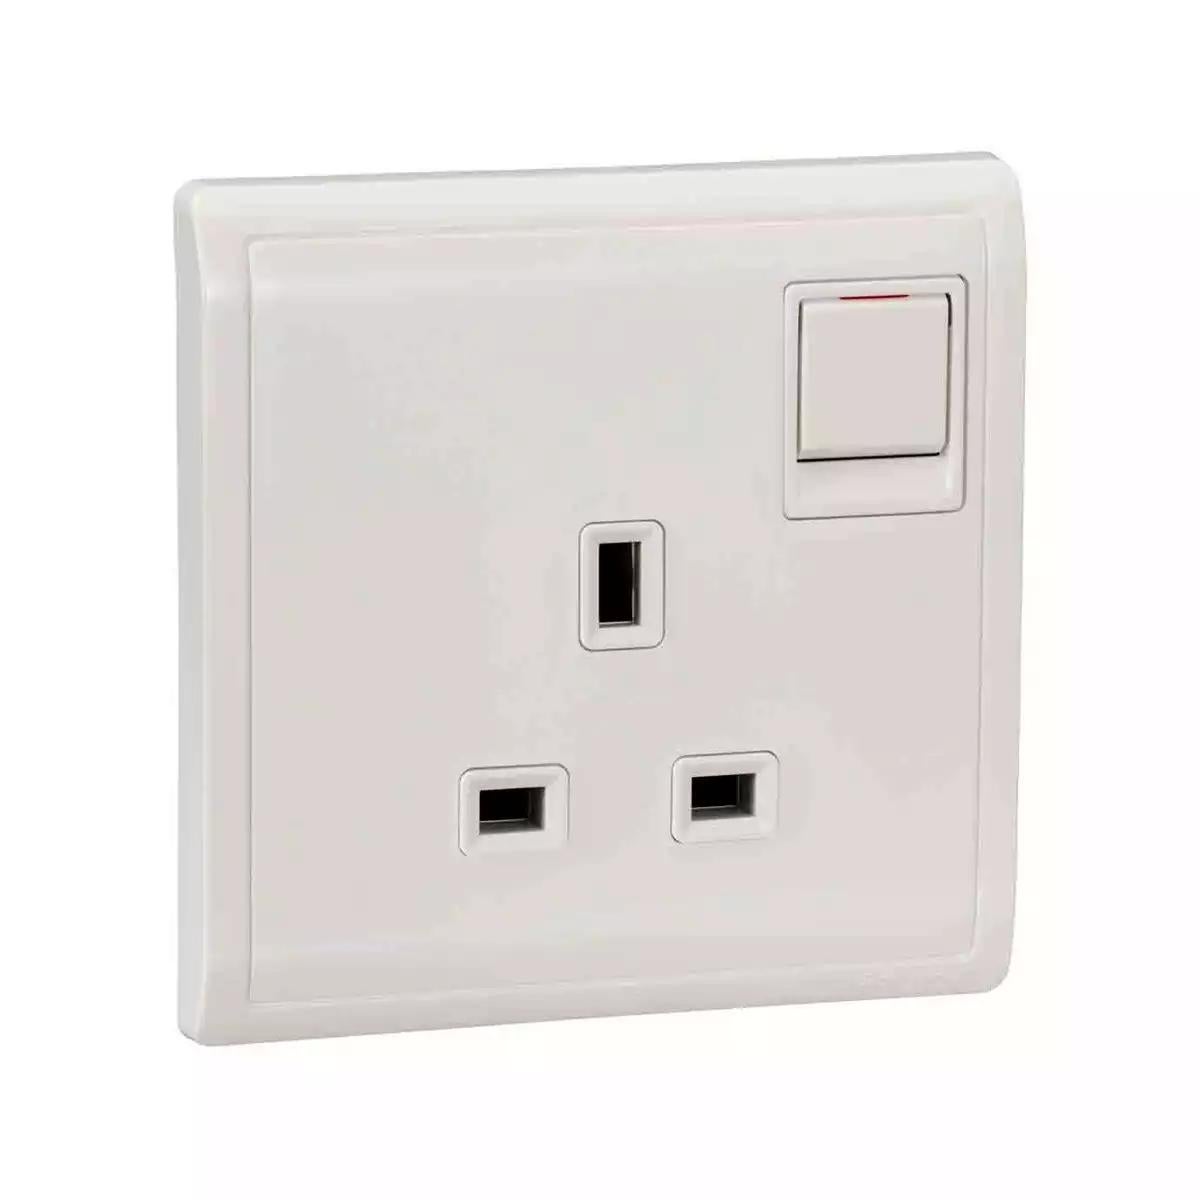 Pieno 13A 250V 1 Gang Switched Socket White